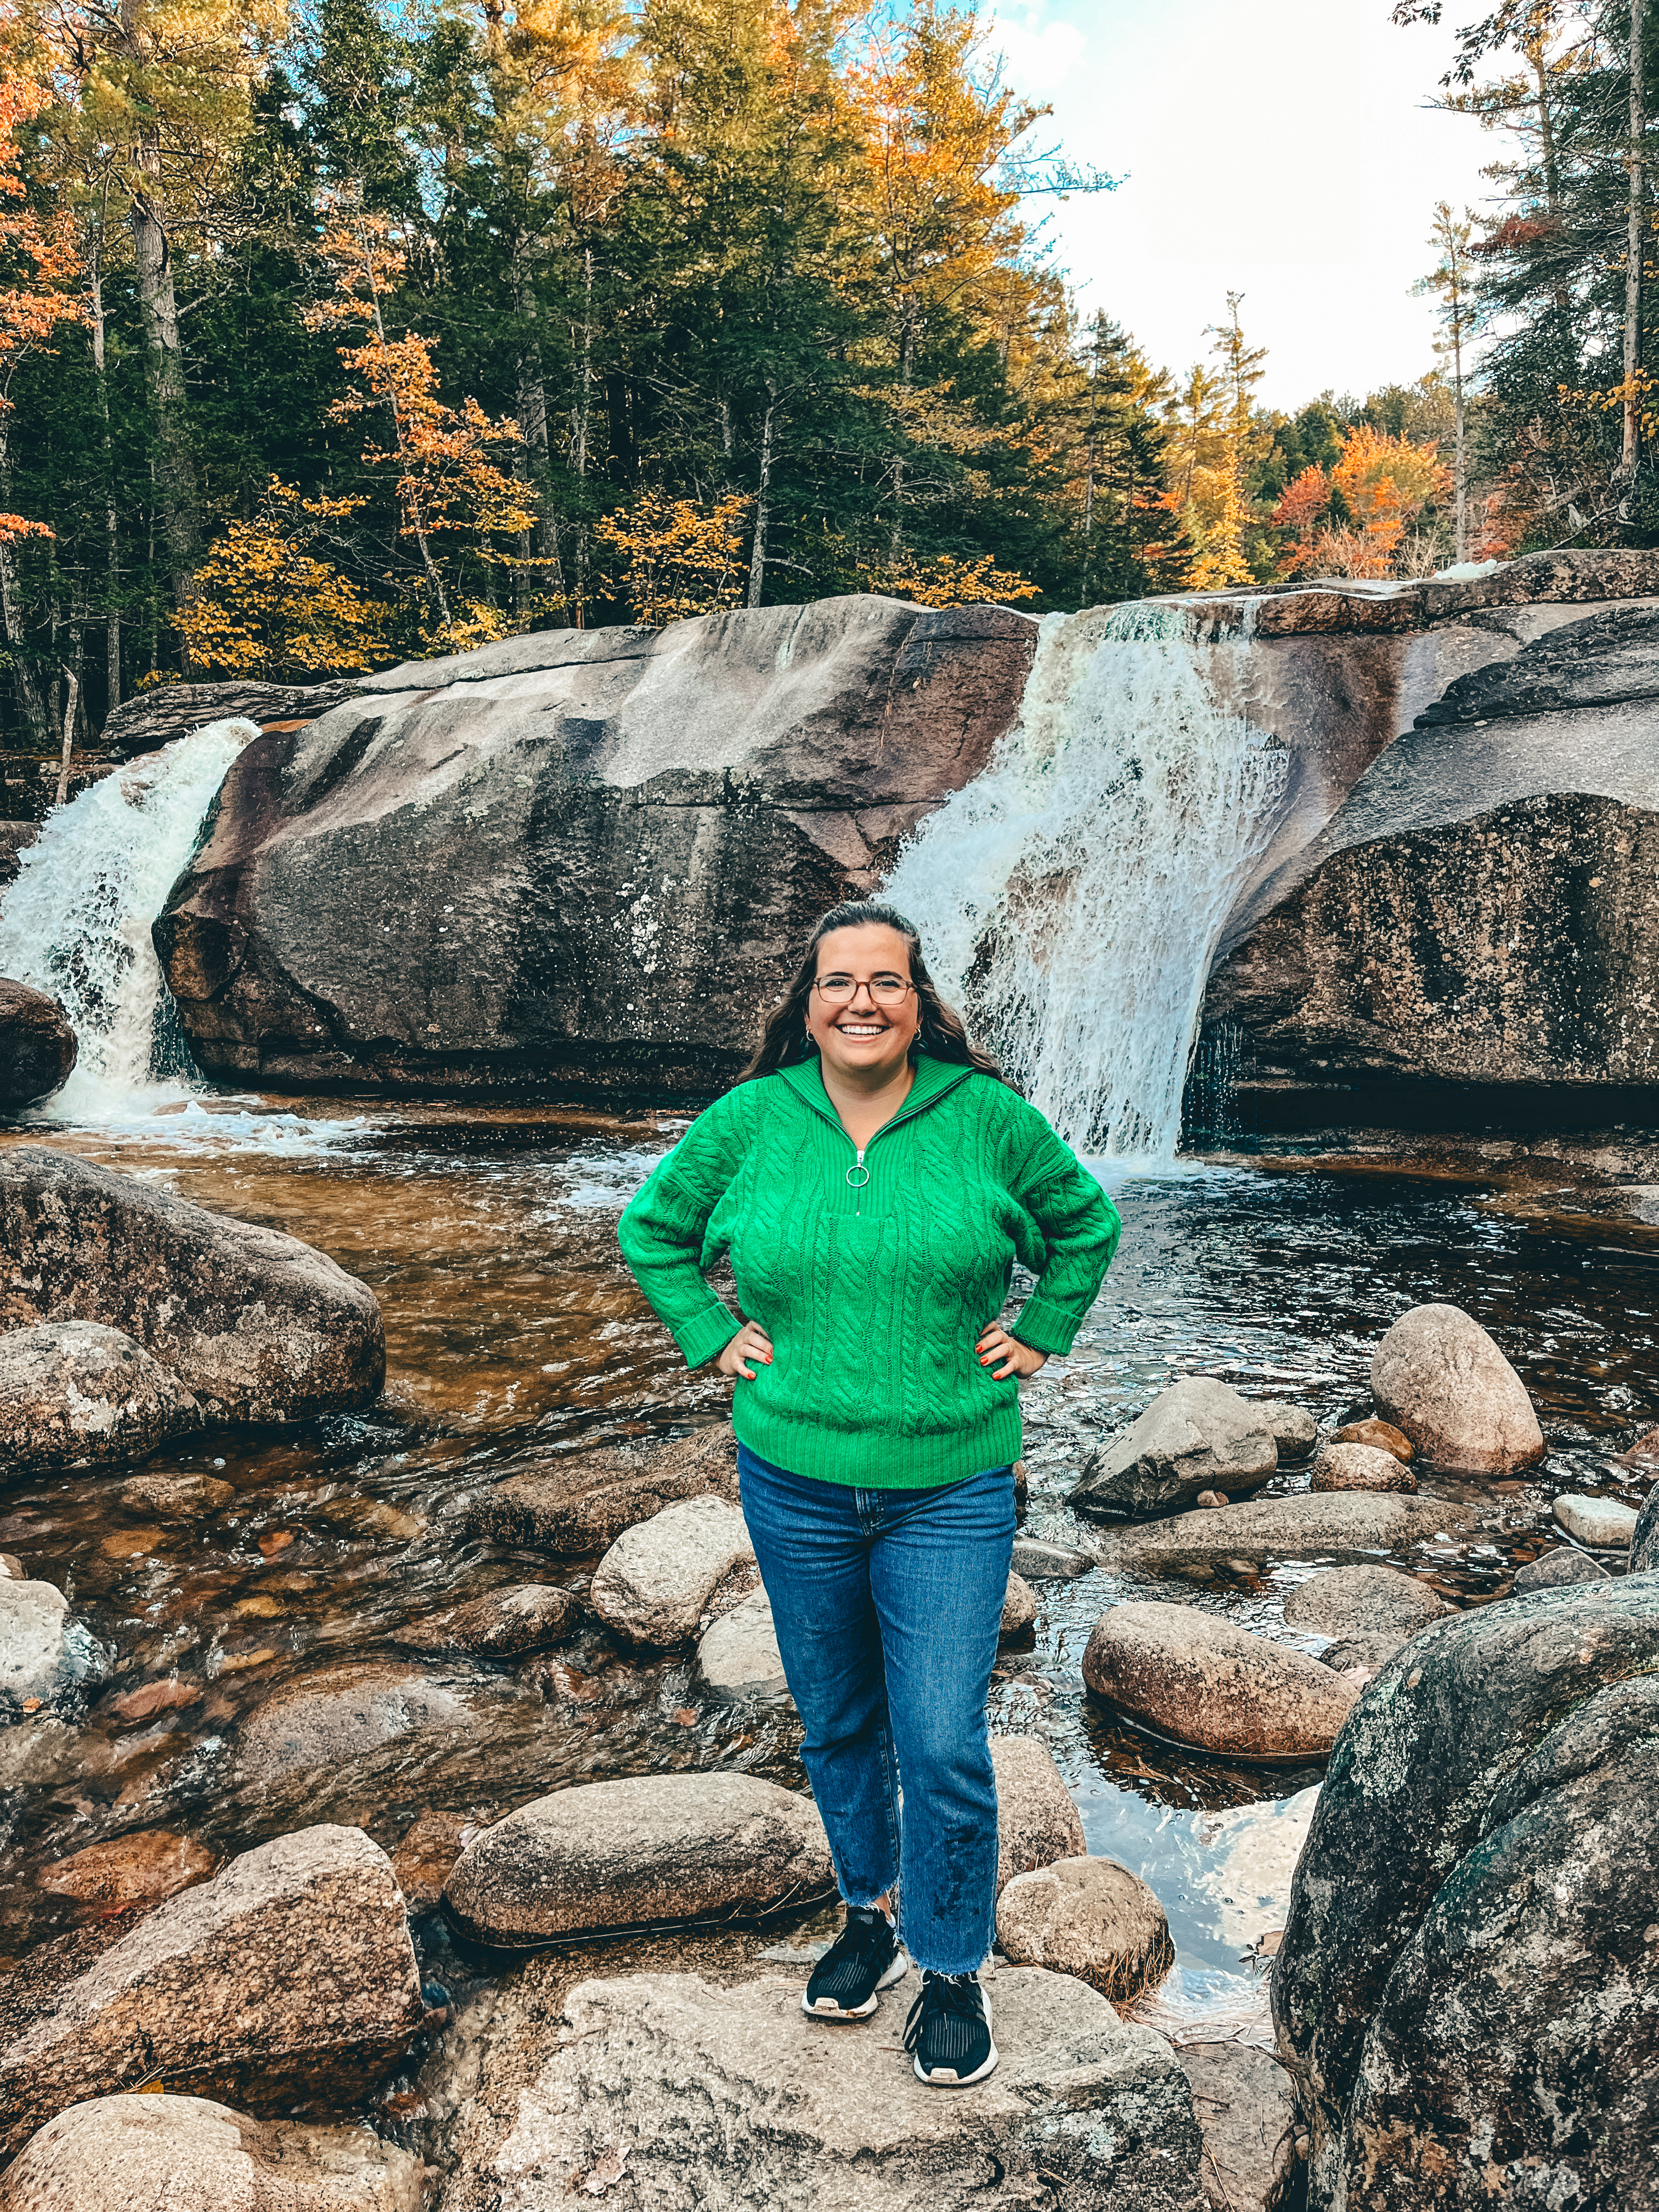 A woman in a bright green sweater and blue jeans stands smiling in front of a small waterfall surrounded by autumn-colored trees, an ideal setting for showcasing a fall travel capsule wardrobe